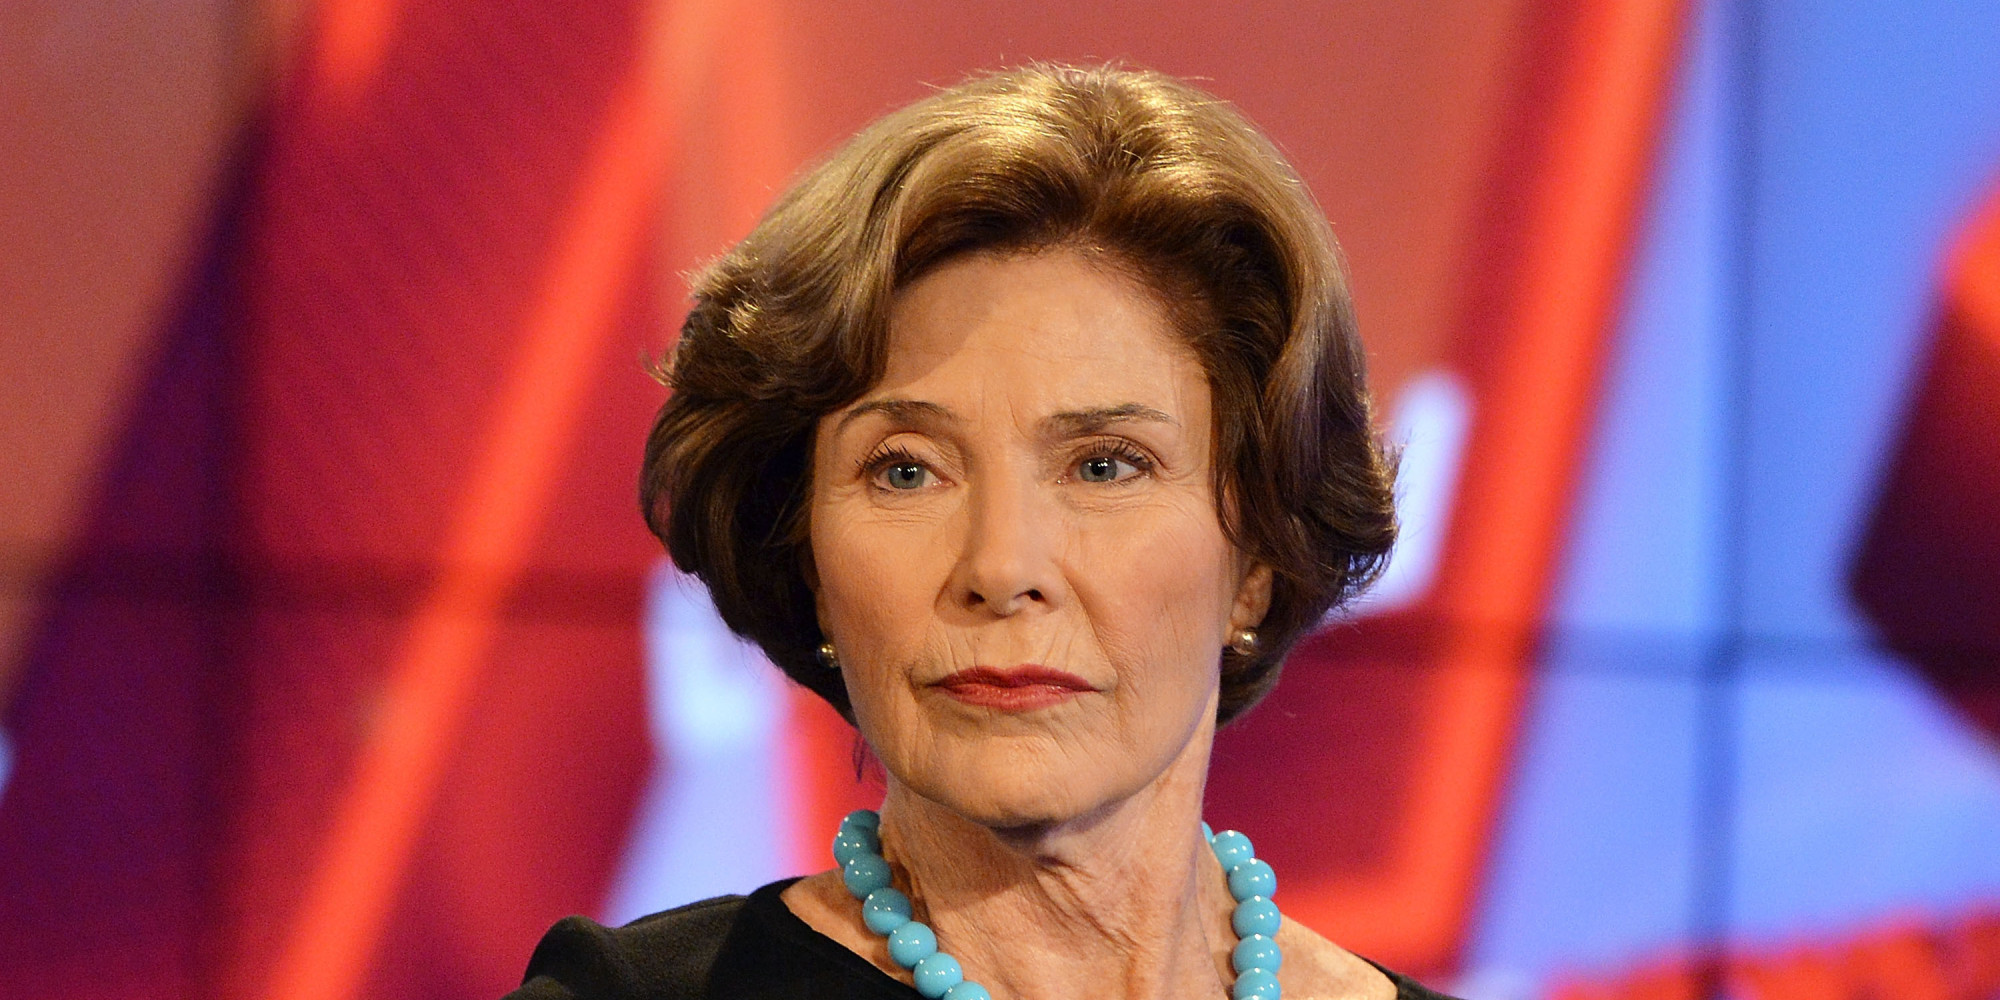 How to write to laura bush